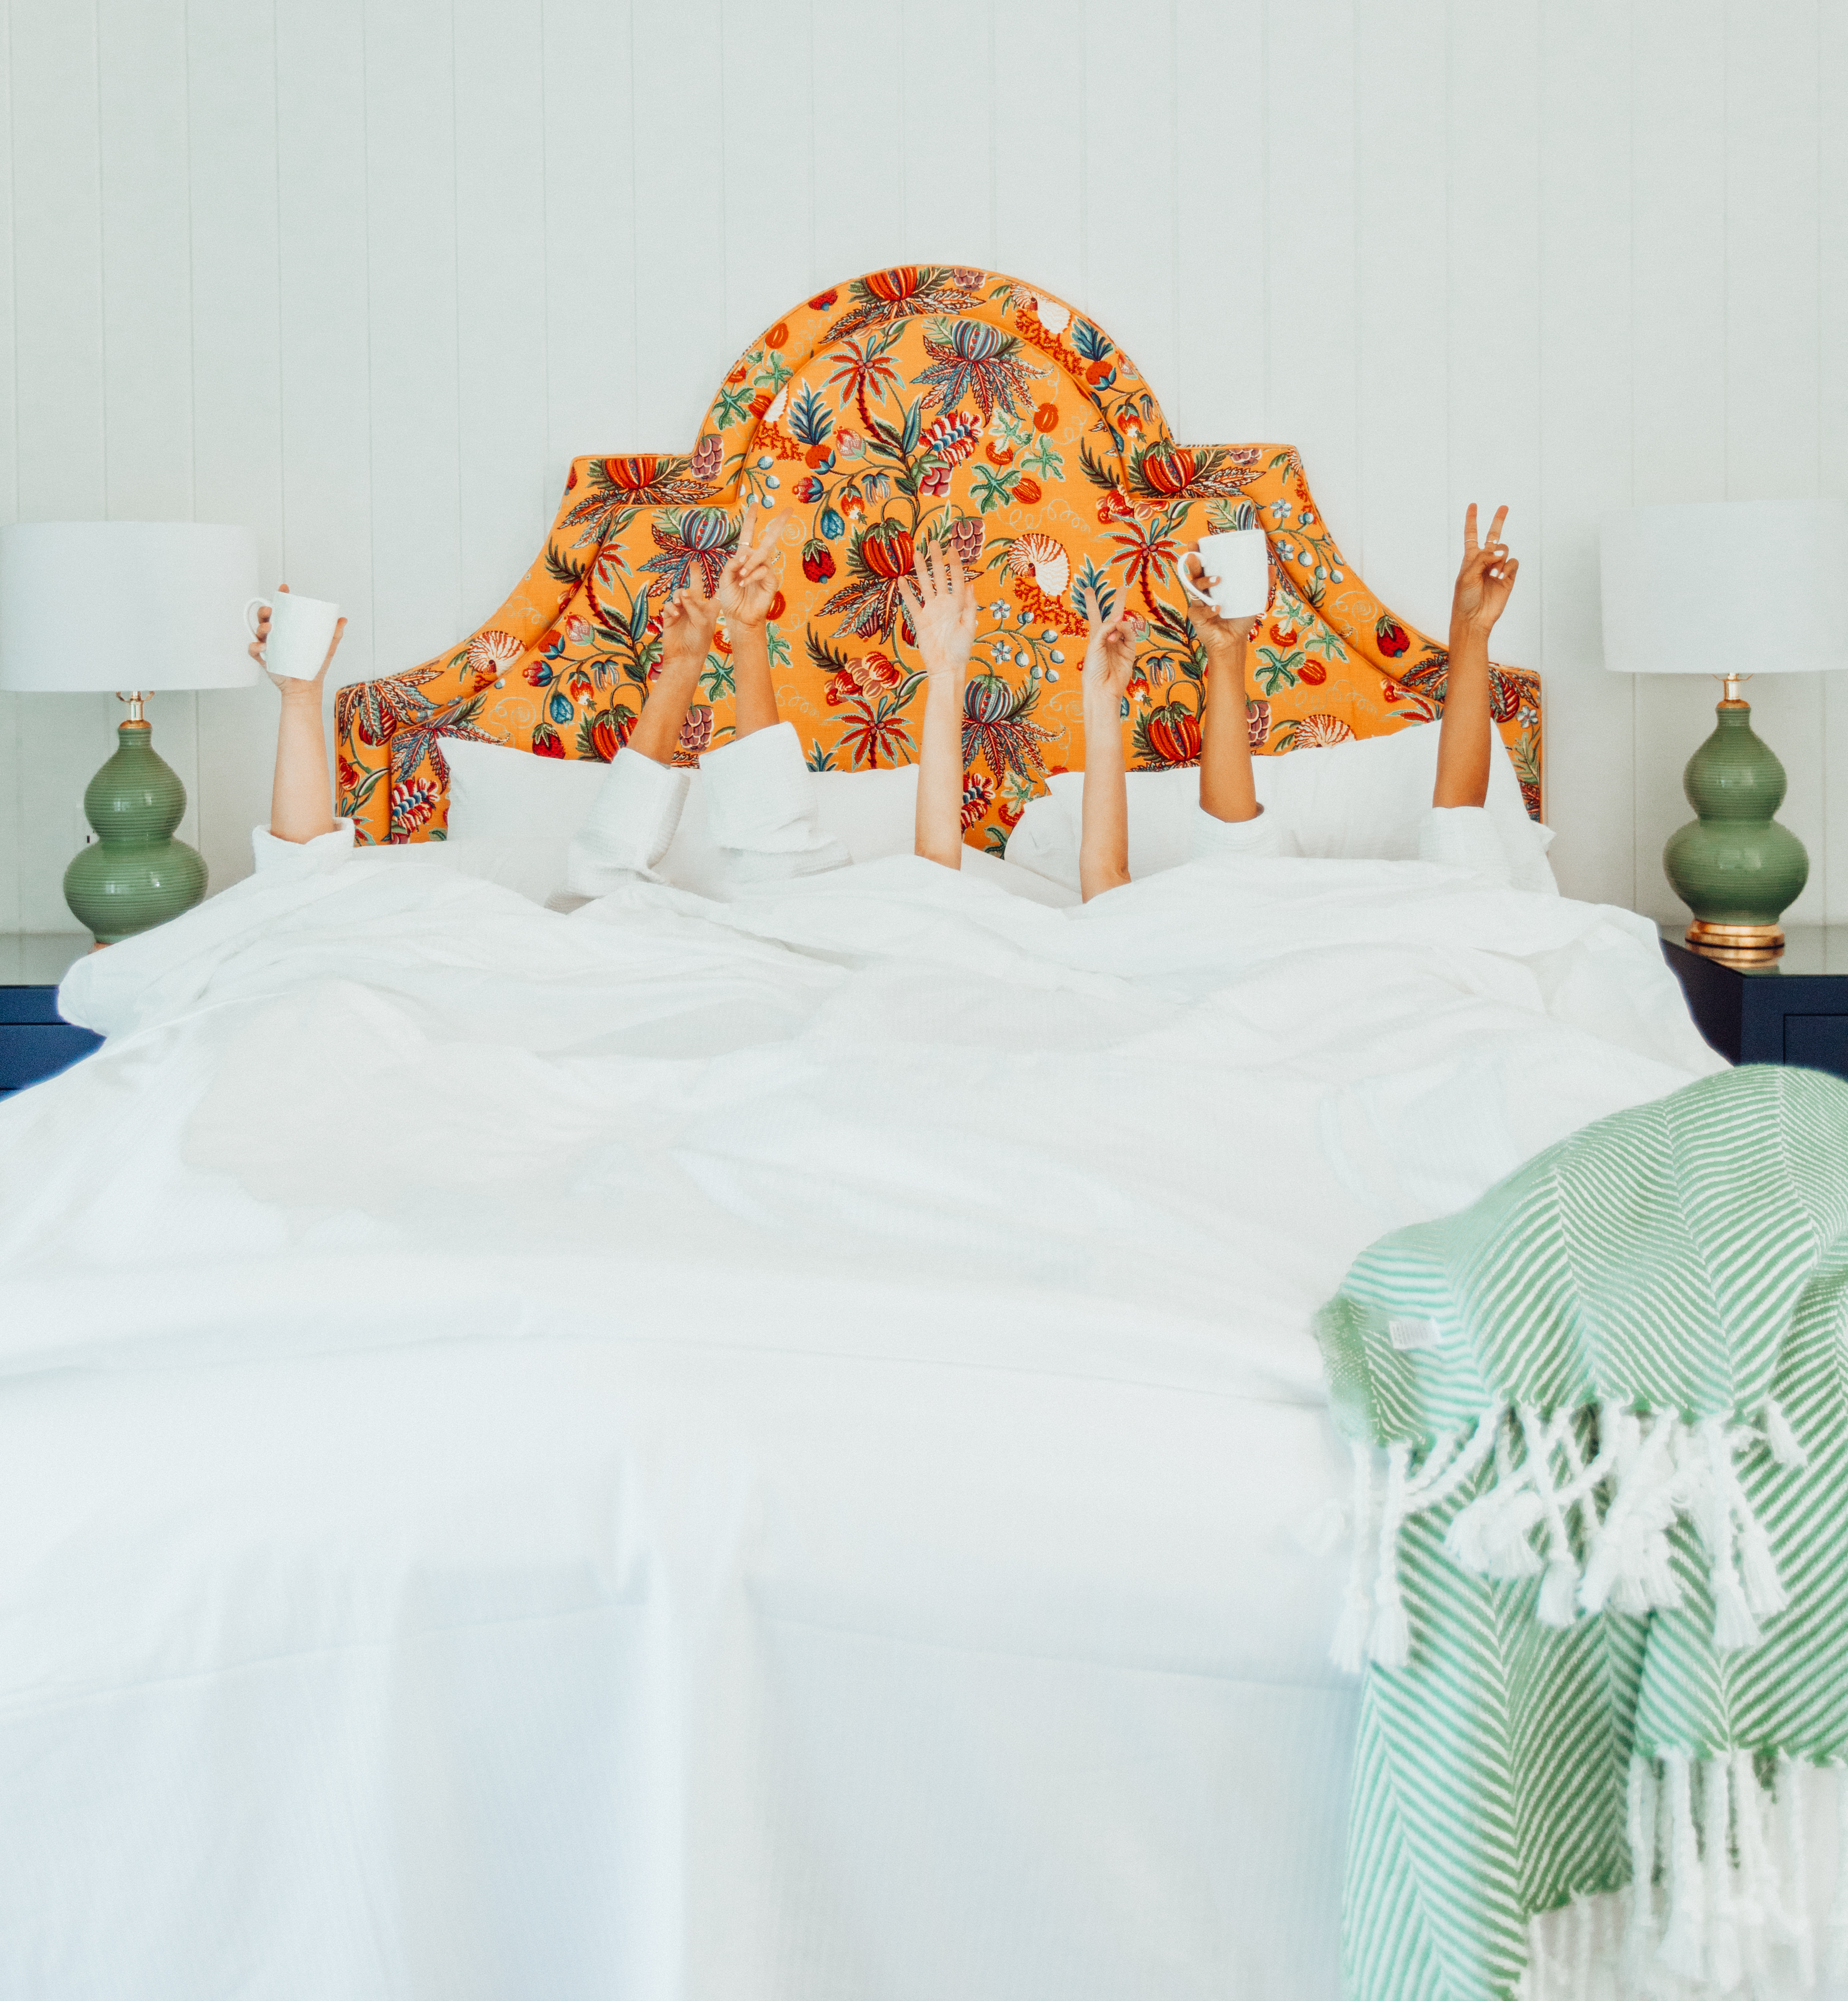 Best Places to Stay in Maine | New Trendy Boutique Hotel in Kennebunkport | Yachtsman Hotel & Marina | Maine Travel Guide via @elanaloo + elanaloo.com